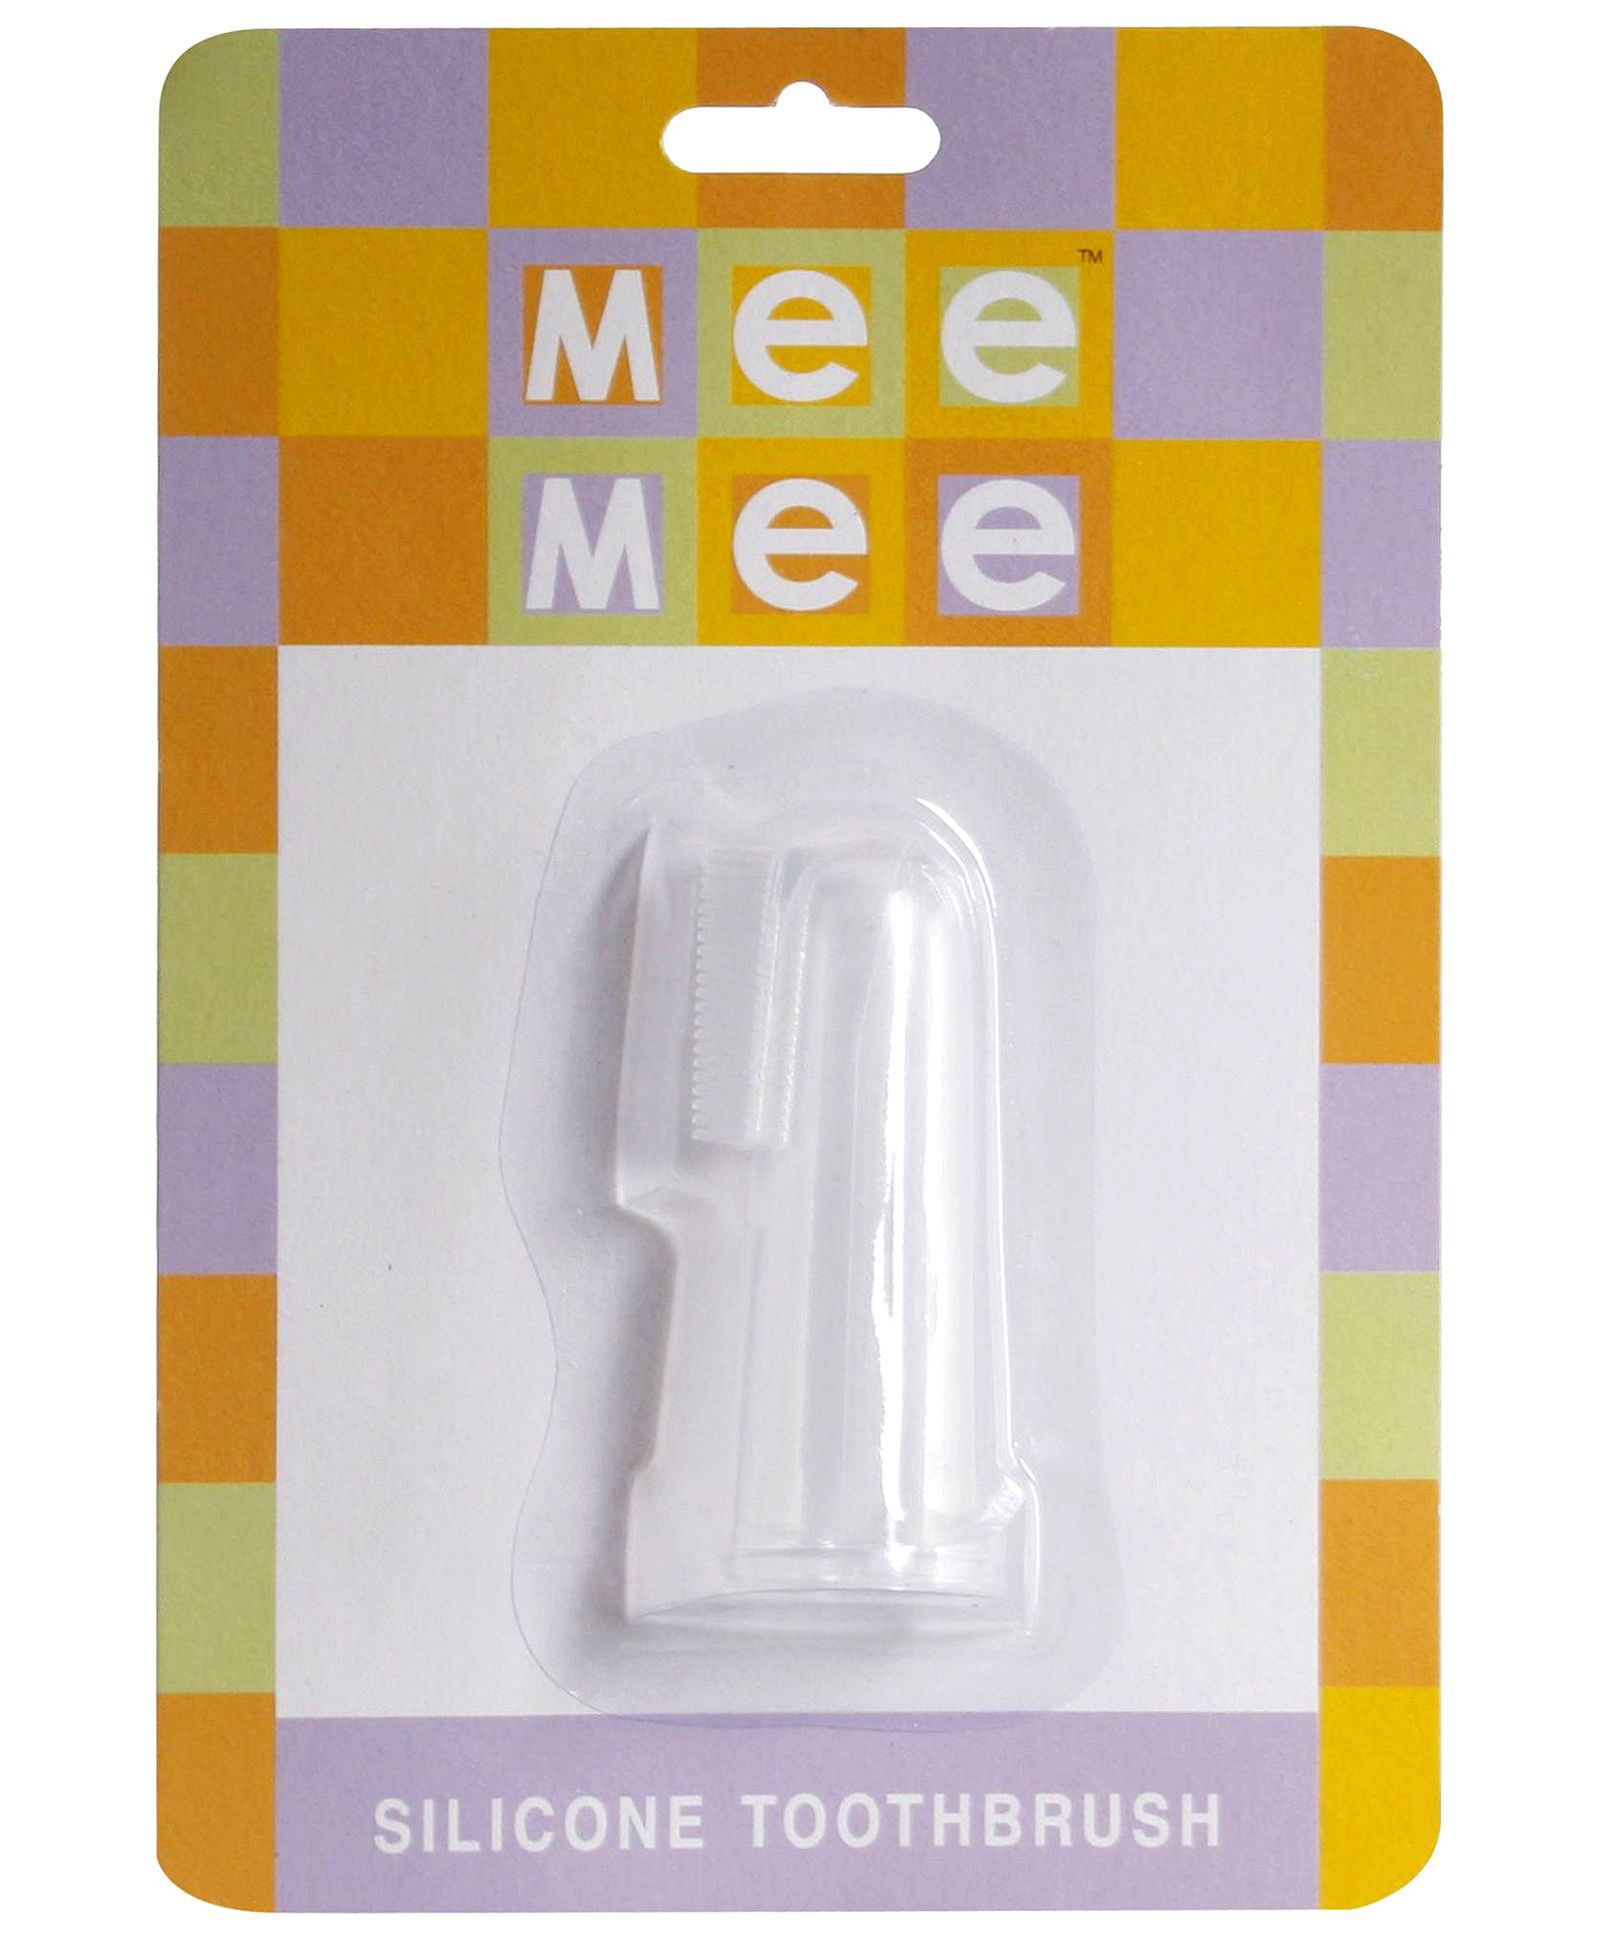 Mee Mee - Silicone Toothbrush